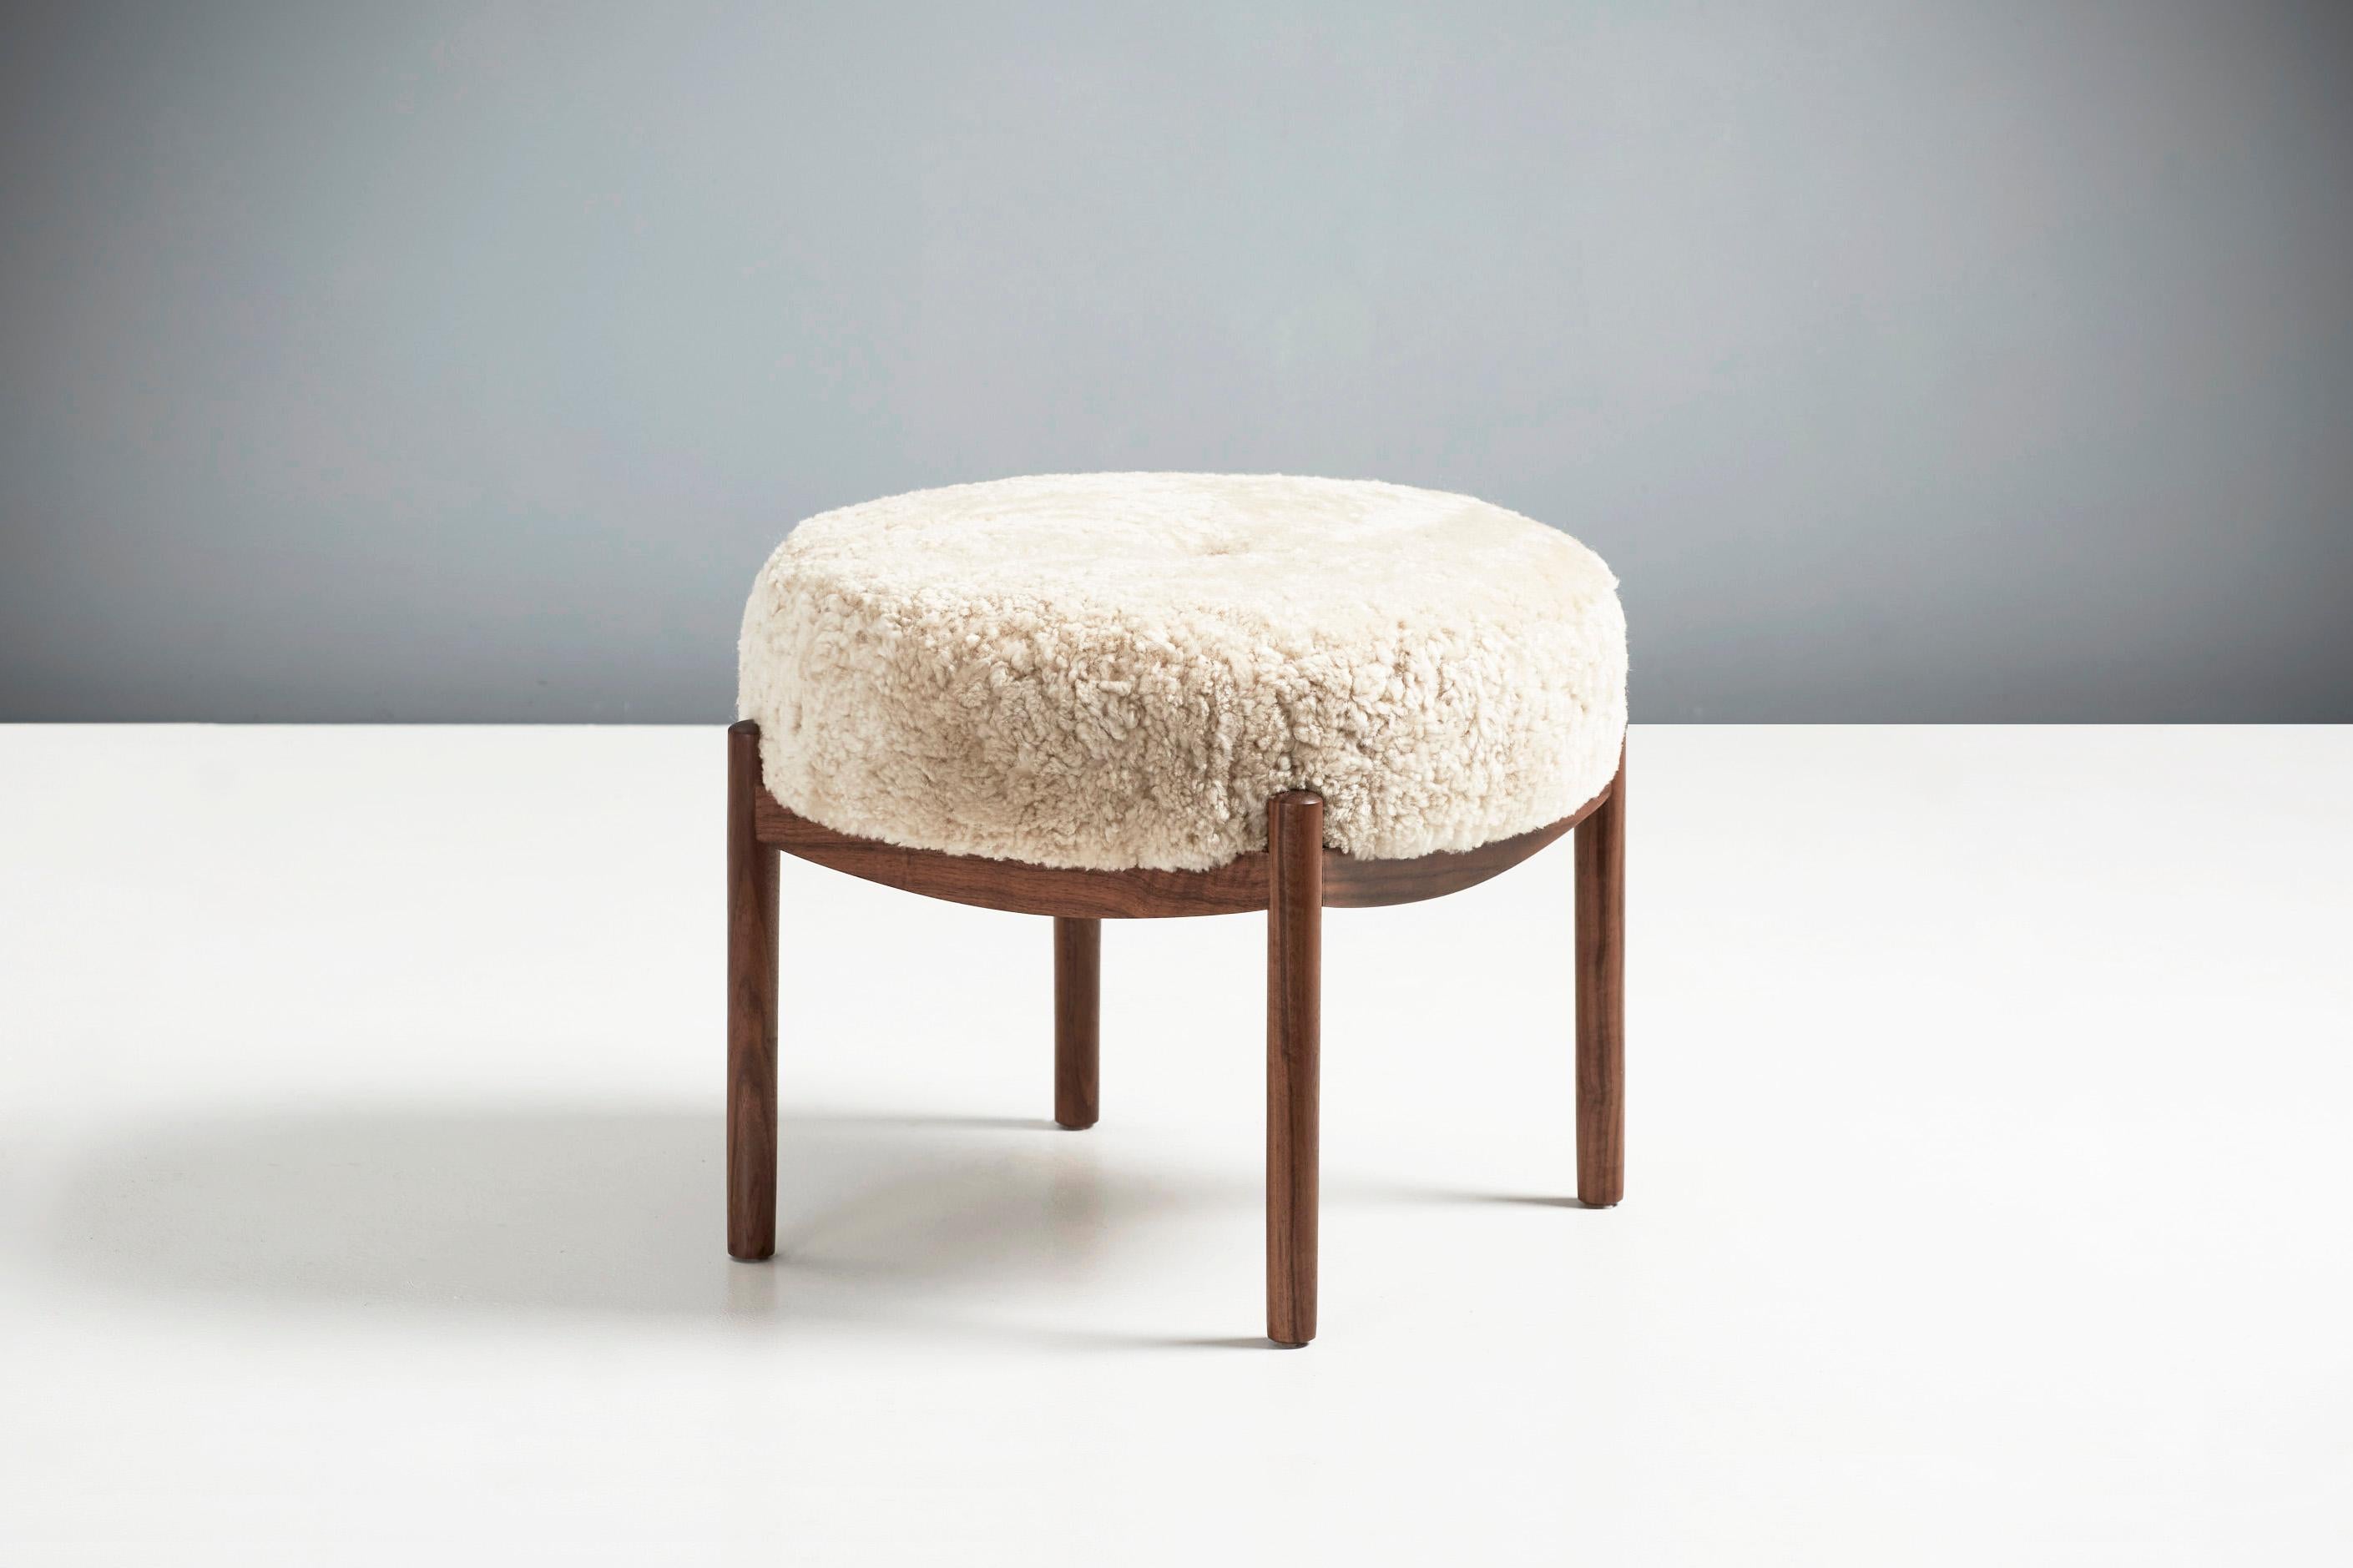 Dagmar Design

Esko Ottoman

A custom-made round ottoman with solid wood frame developed & produced at our workshops in London. This example has an oiled walnut frame with seat upholstered in Moonlight colour sheepskin. The Esko stool is available